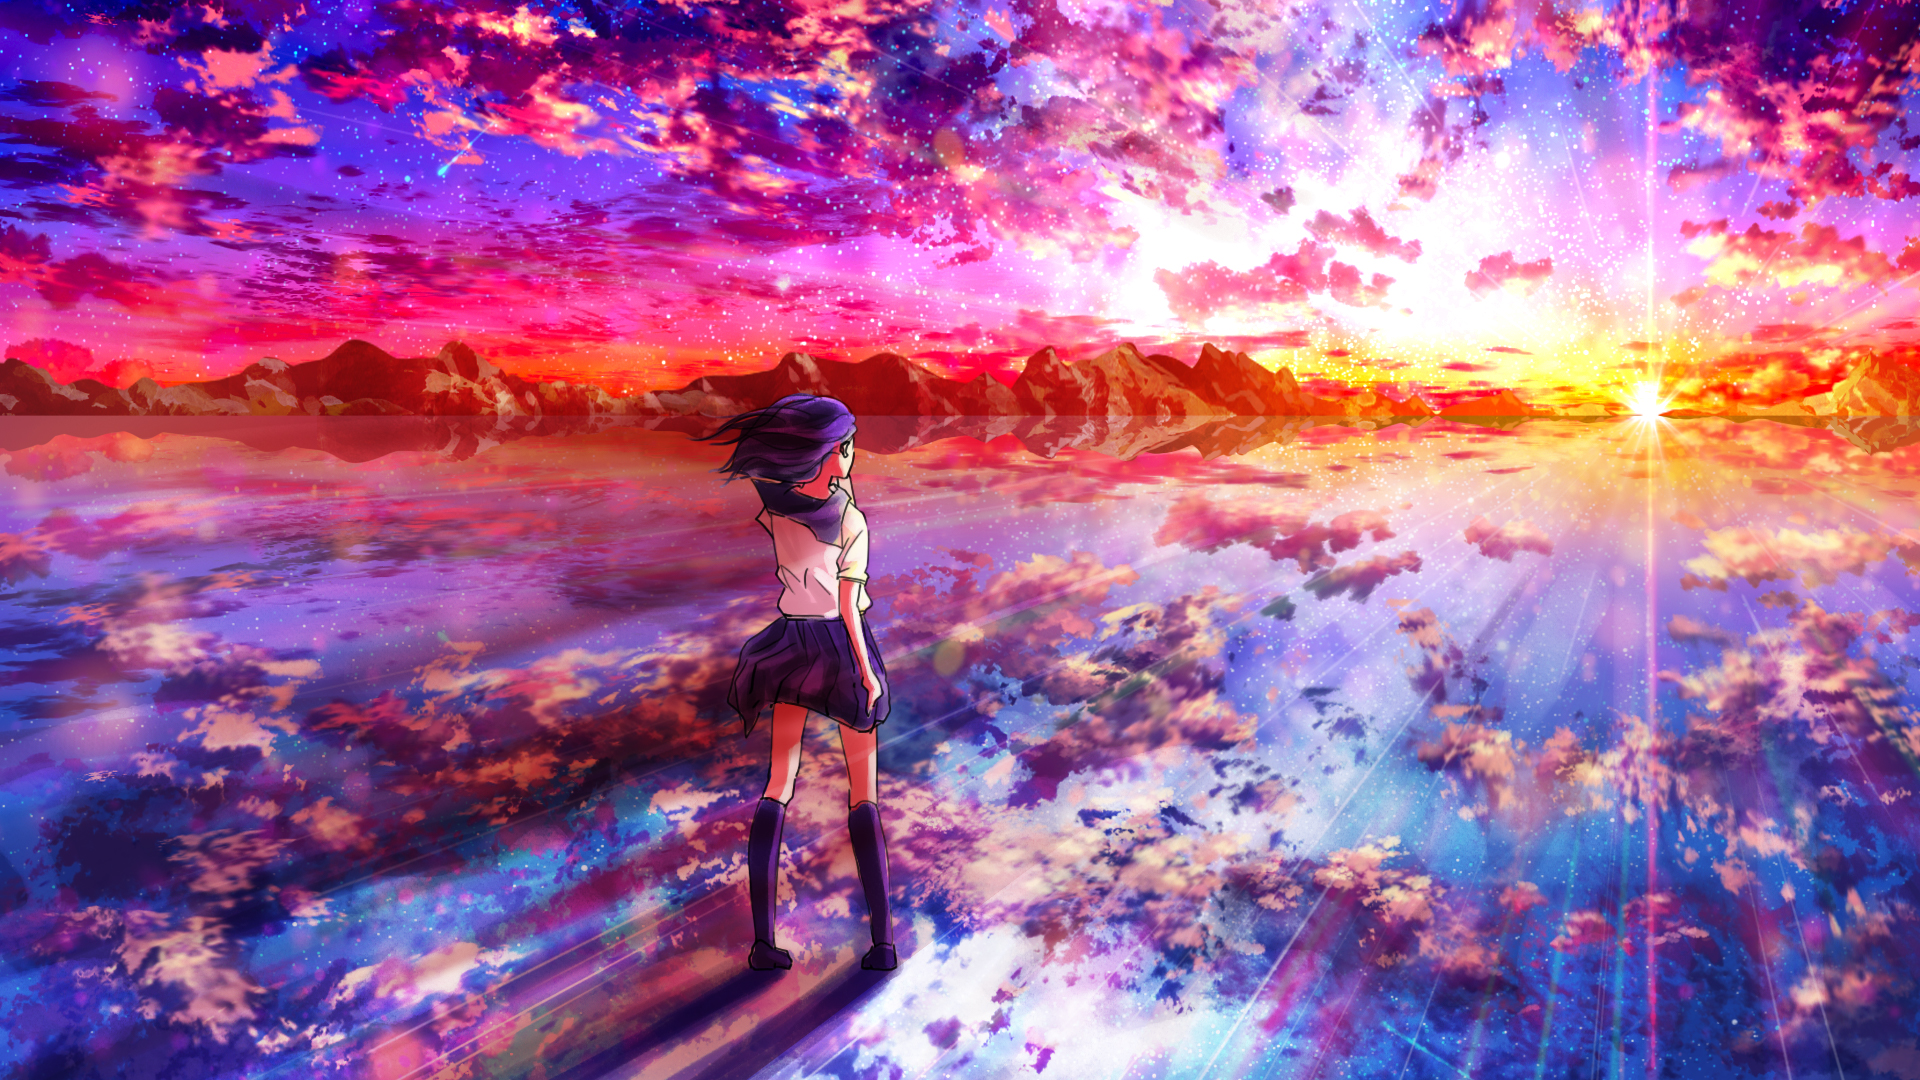 100+] Anime Sunset Iphone Wallpapers | Wallpapers.com